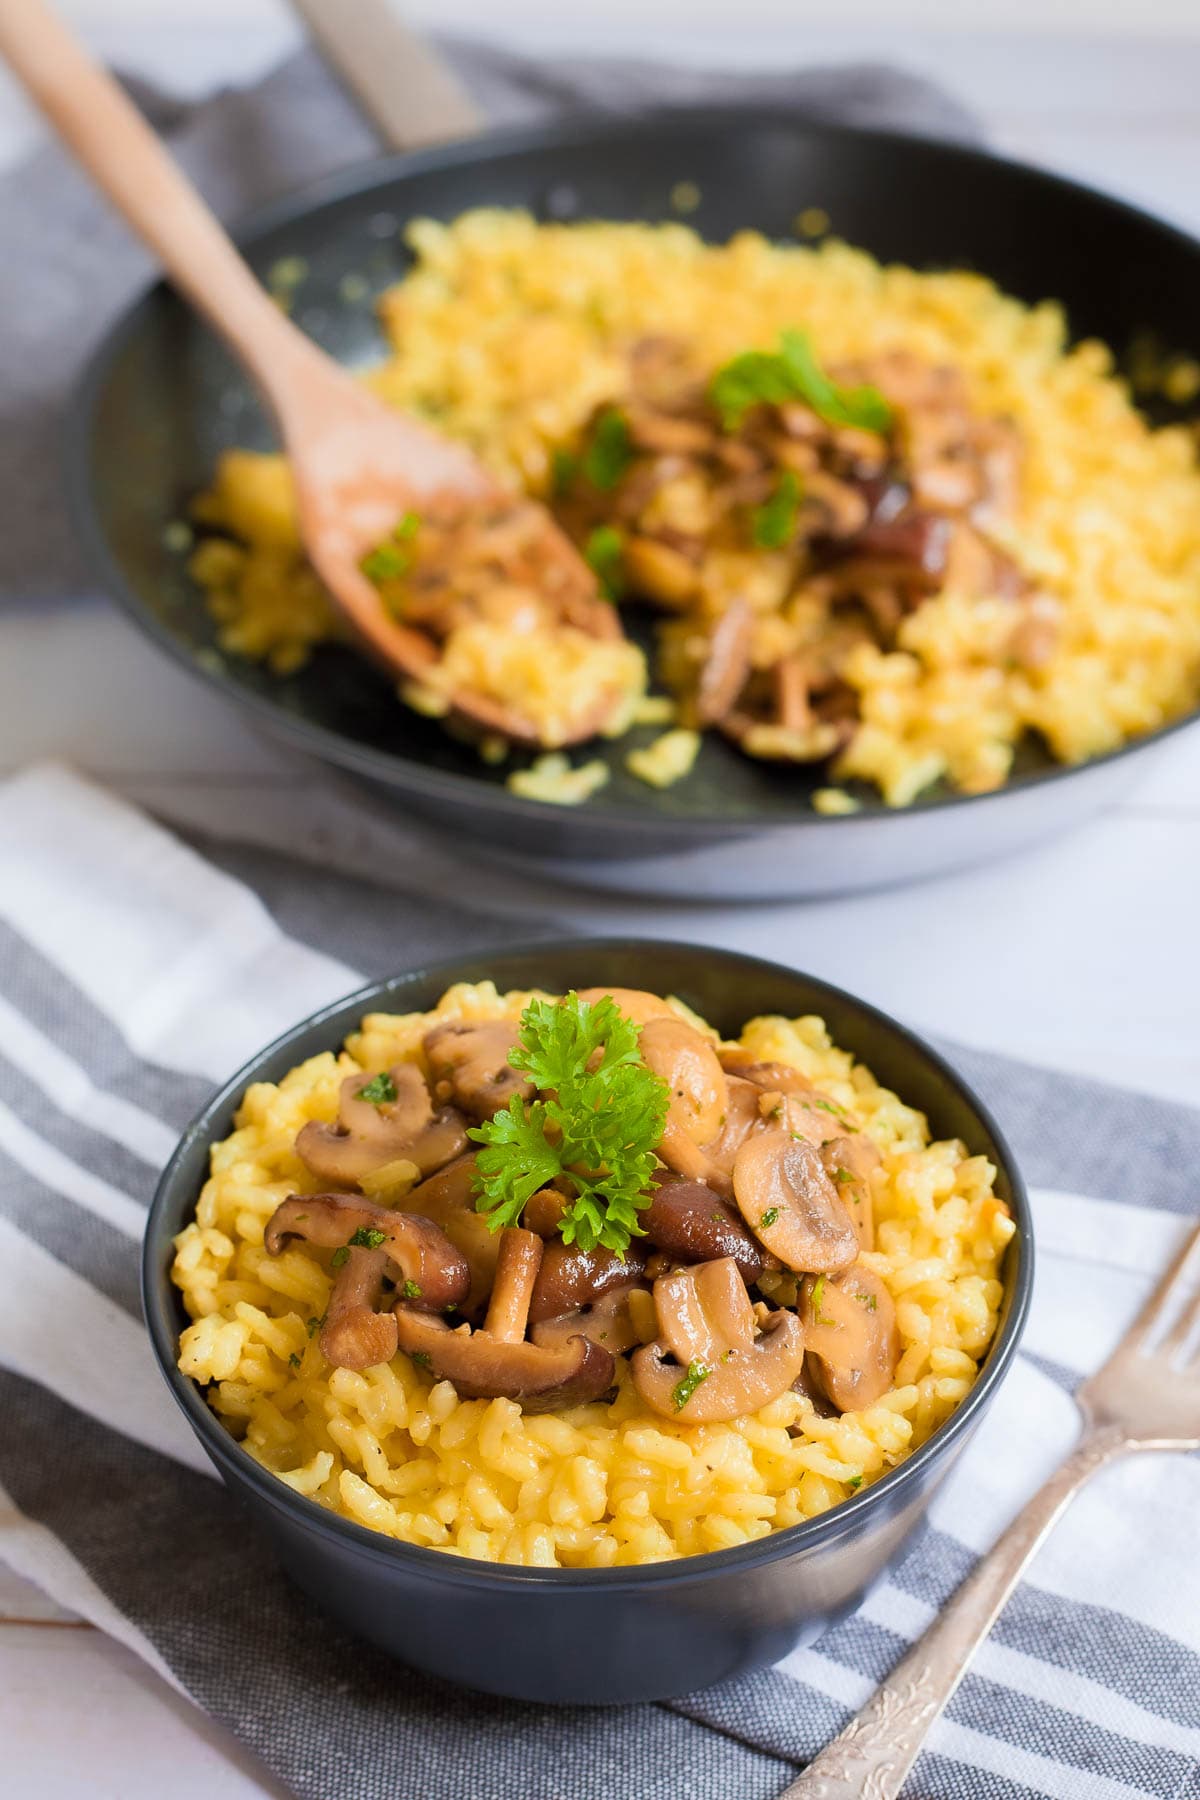 A black bowl of yellow creamy rice topped with brown mushroom slices and green fresh parsley. Leftover risotto is in a black frying pan at the back.